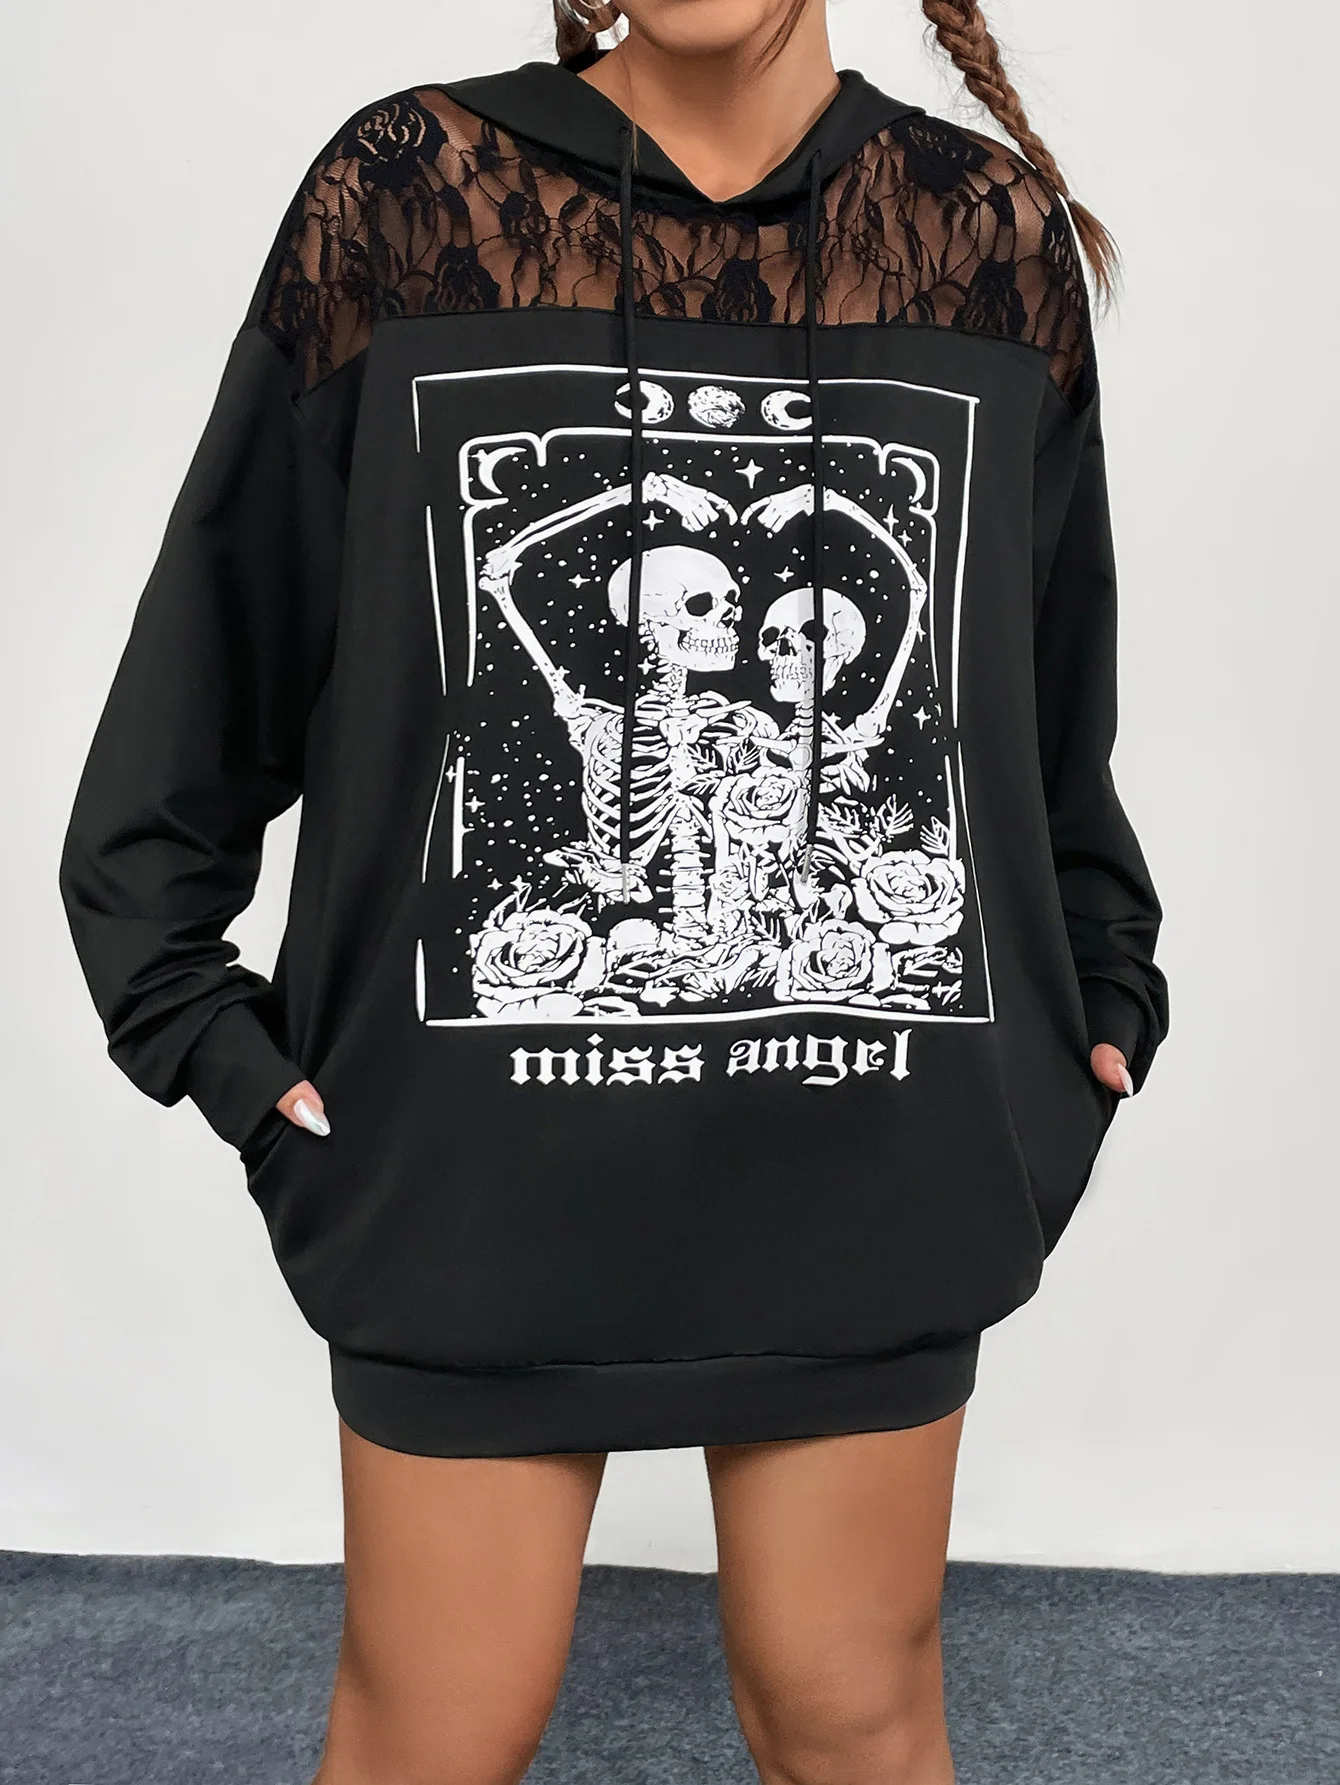 

Goth Dark Lace Patchwork Mall Gothic Aesthetic Hoodies Grunge Punk Skull Print Pullovers Emo Loose Sheer Alt Fashion Streetwear